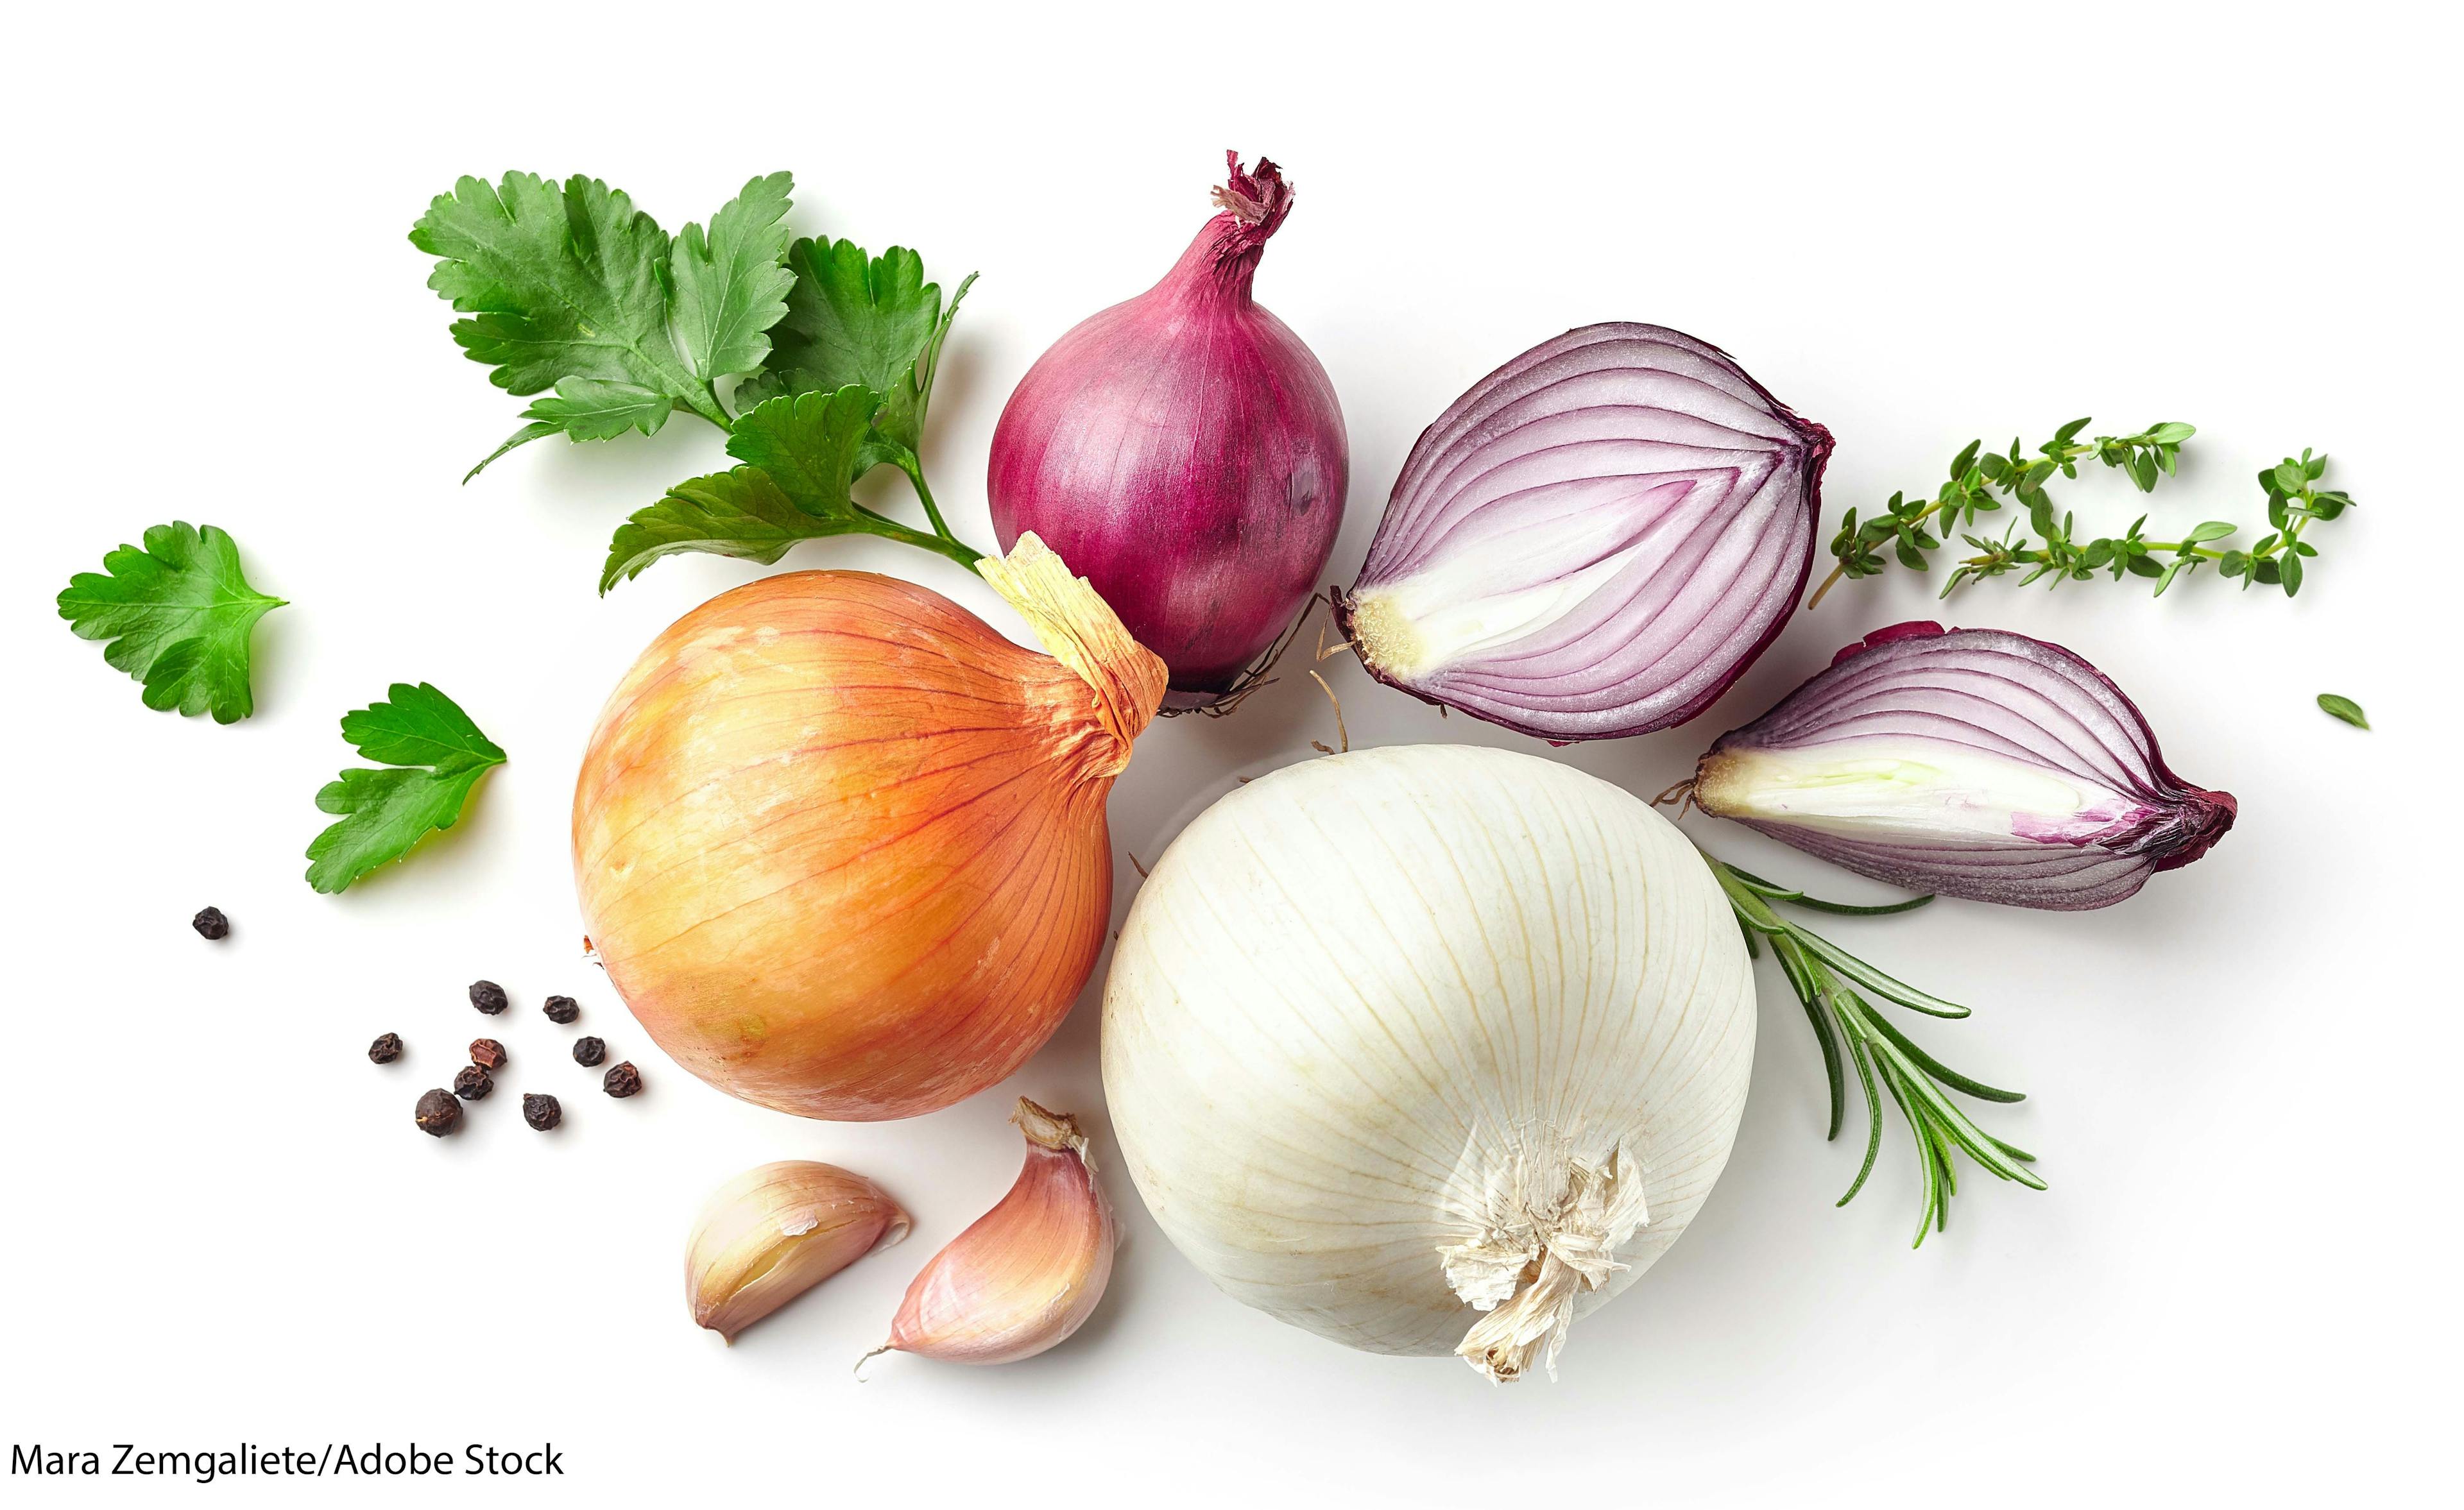 Can Eating Garlic and Onions Protect Against Breast Cancer?